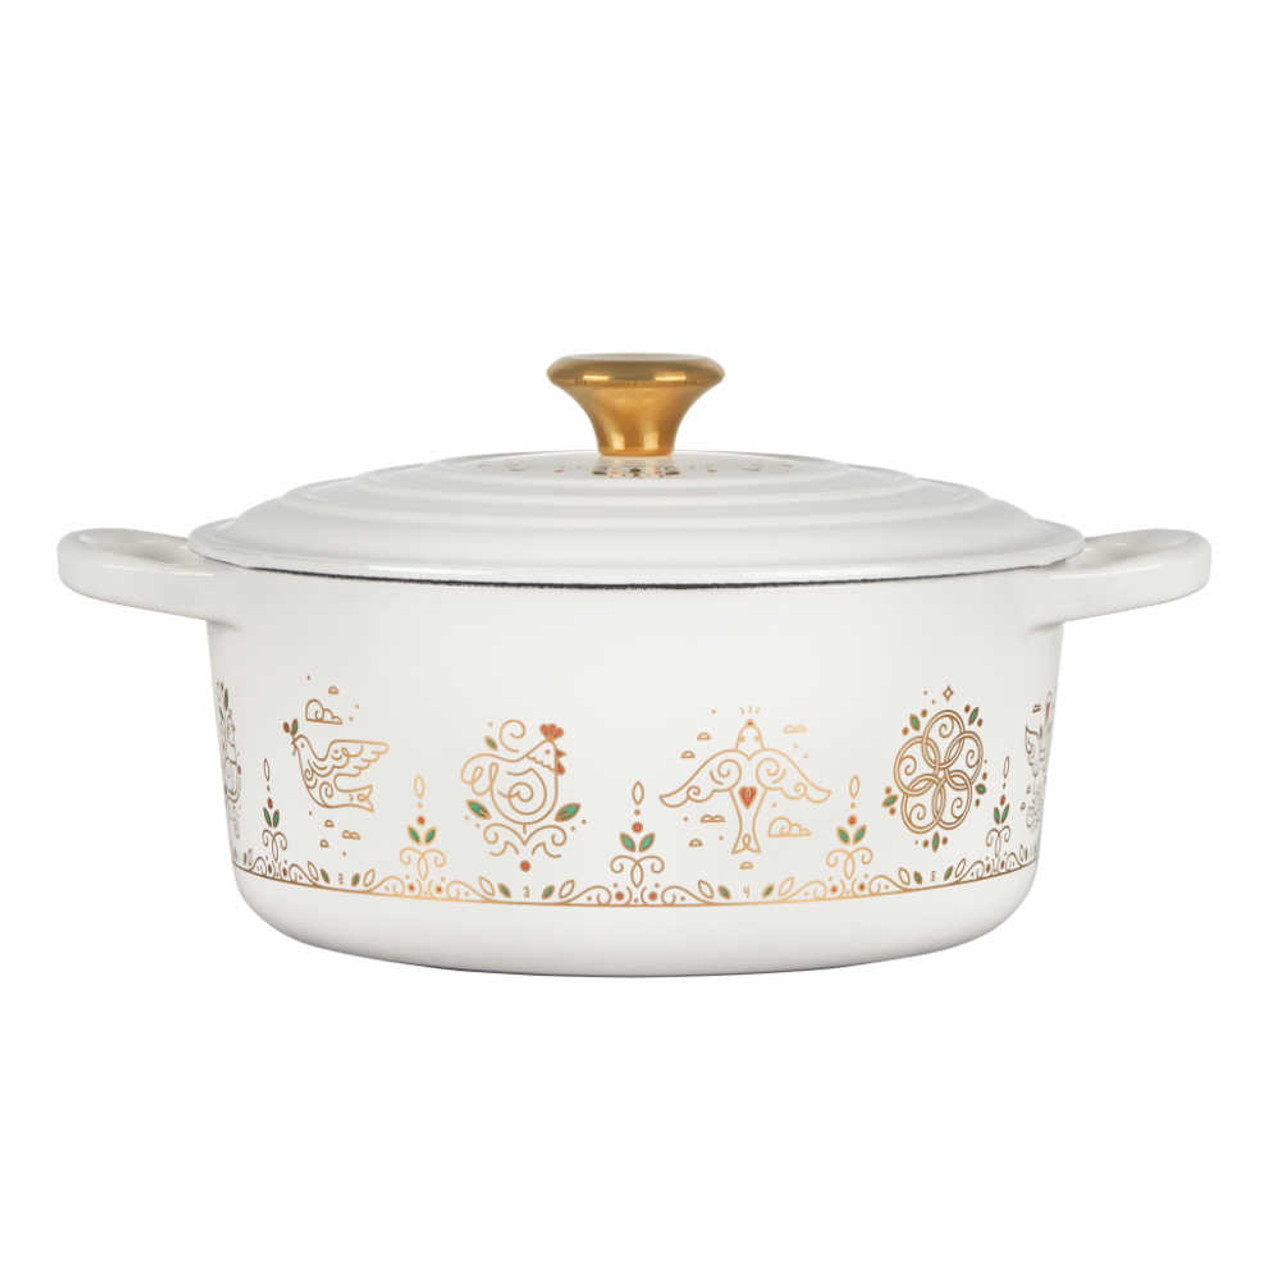 https://cdn11.bigcommerce.com/s-hccytny0od/images/stencil/1280x1280/products/5735/25167/Le_Creuset_Noel_Collection_12_Days_of_Christmas_Dutch_Oven_1__23973.1695928726.jpg?c=2?imbypass=on